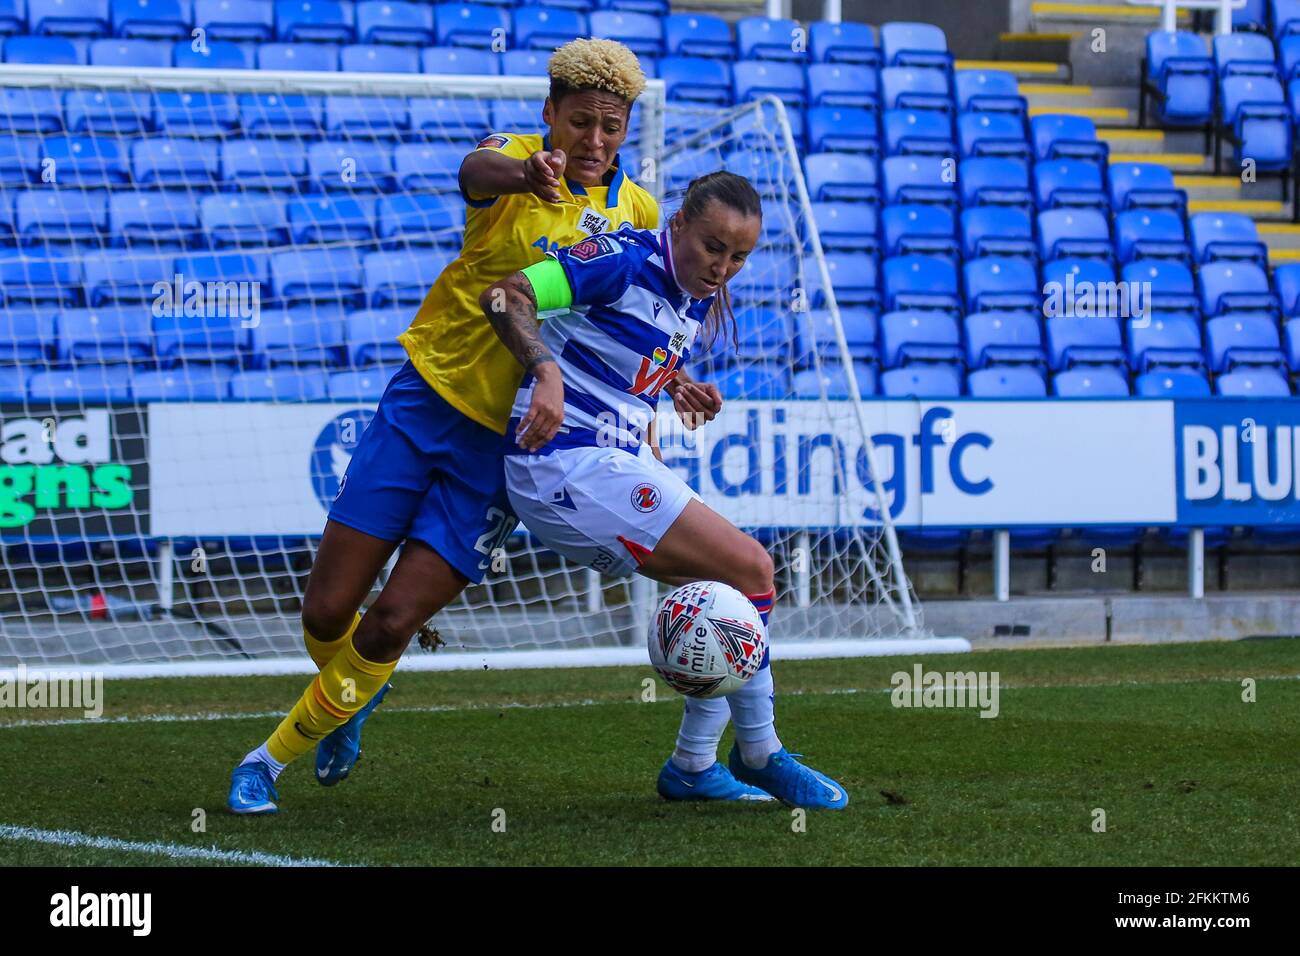 Reading, UK. 01st Dec, 2019. Victoria Williams (Brighton 20) pressures Natasha Harding (Reading 11) during the Barclays FA Womens Super League game between Reading and Brighton & Hove Albion at The Madejski Stadium in Reading. Credit: SPP Sport Press Photo. /Alamy Live News Stock Photo